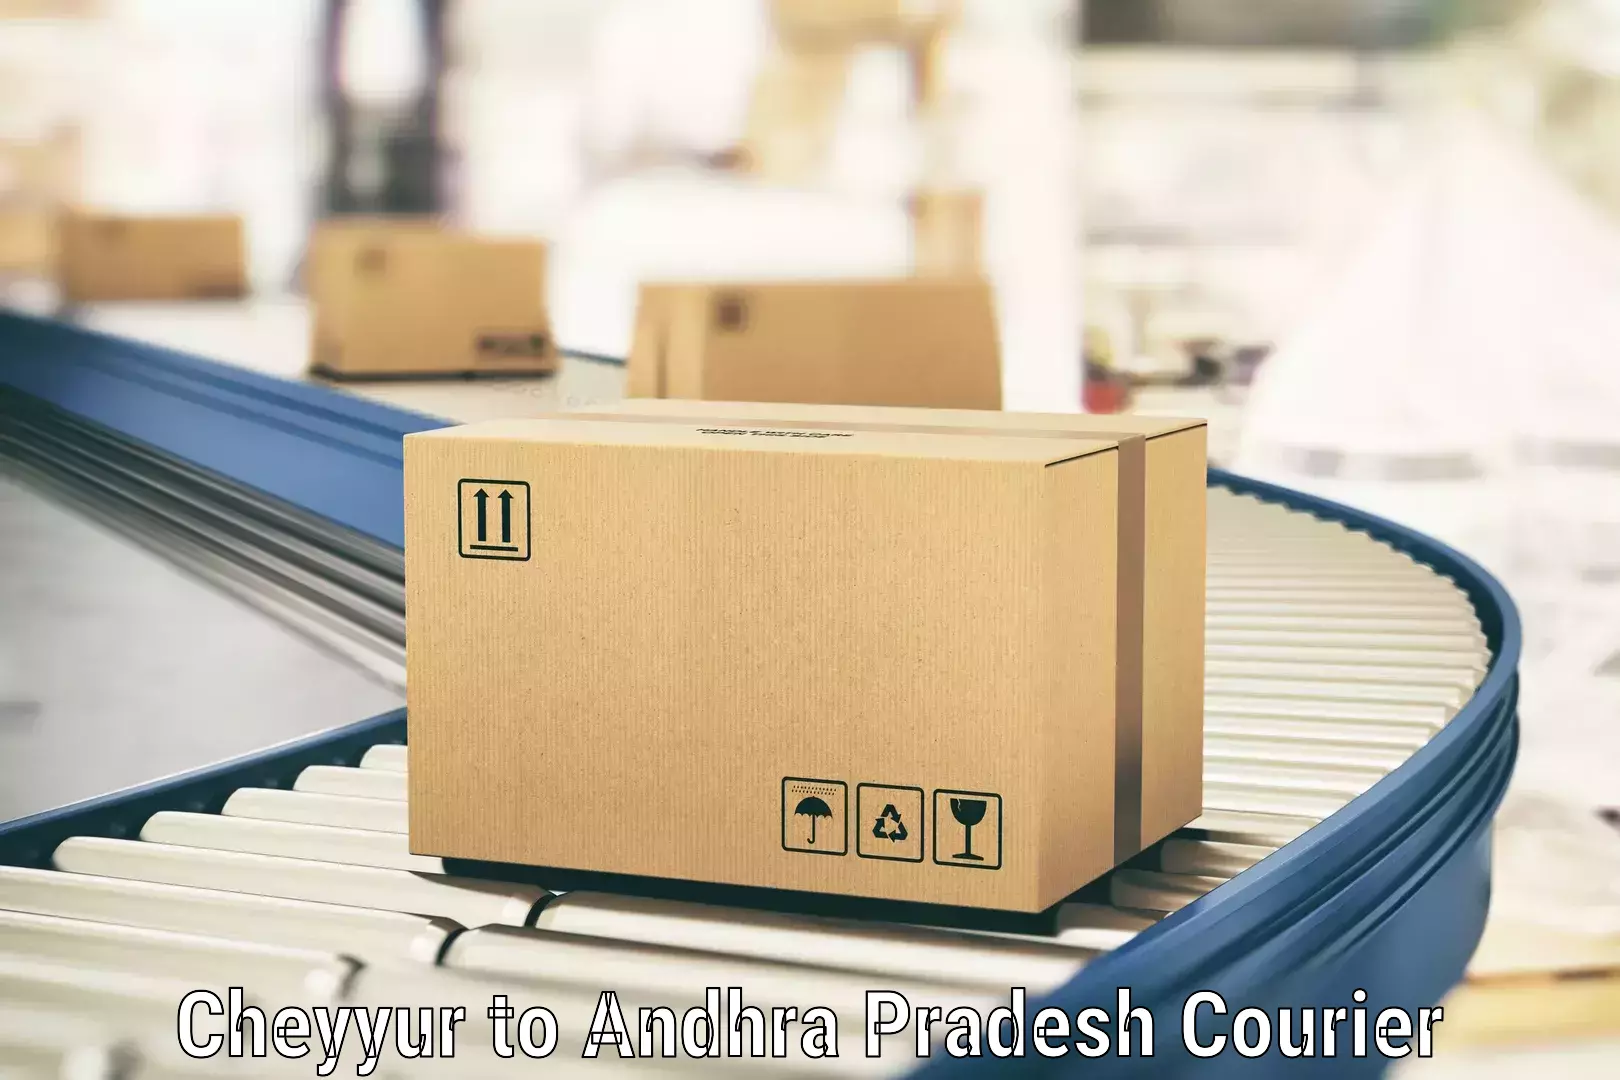 Reliable package handling Cheyyur to Visakhapatnam